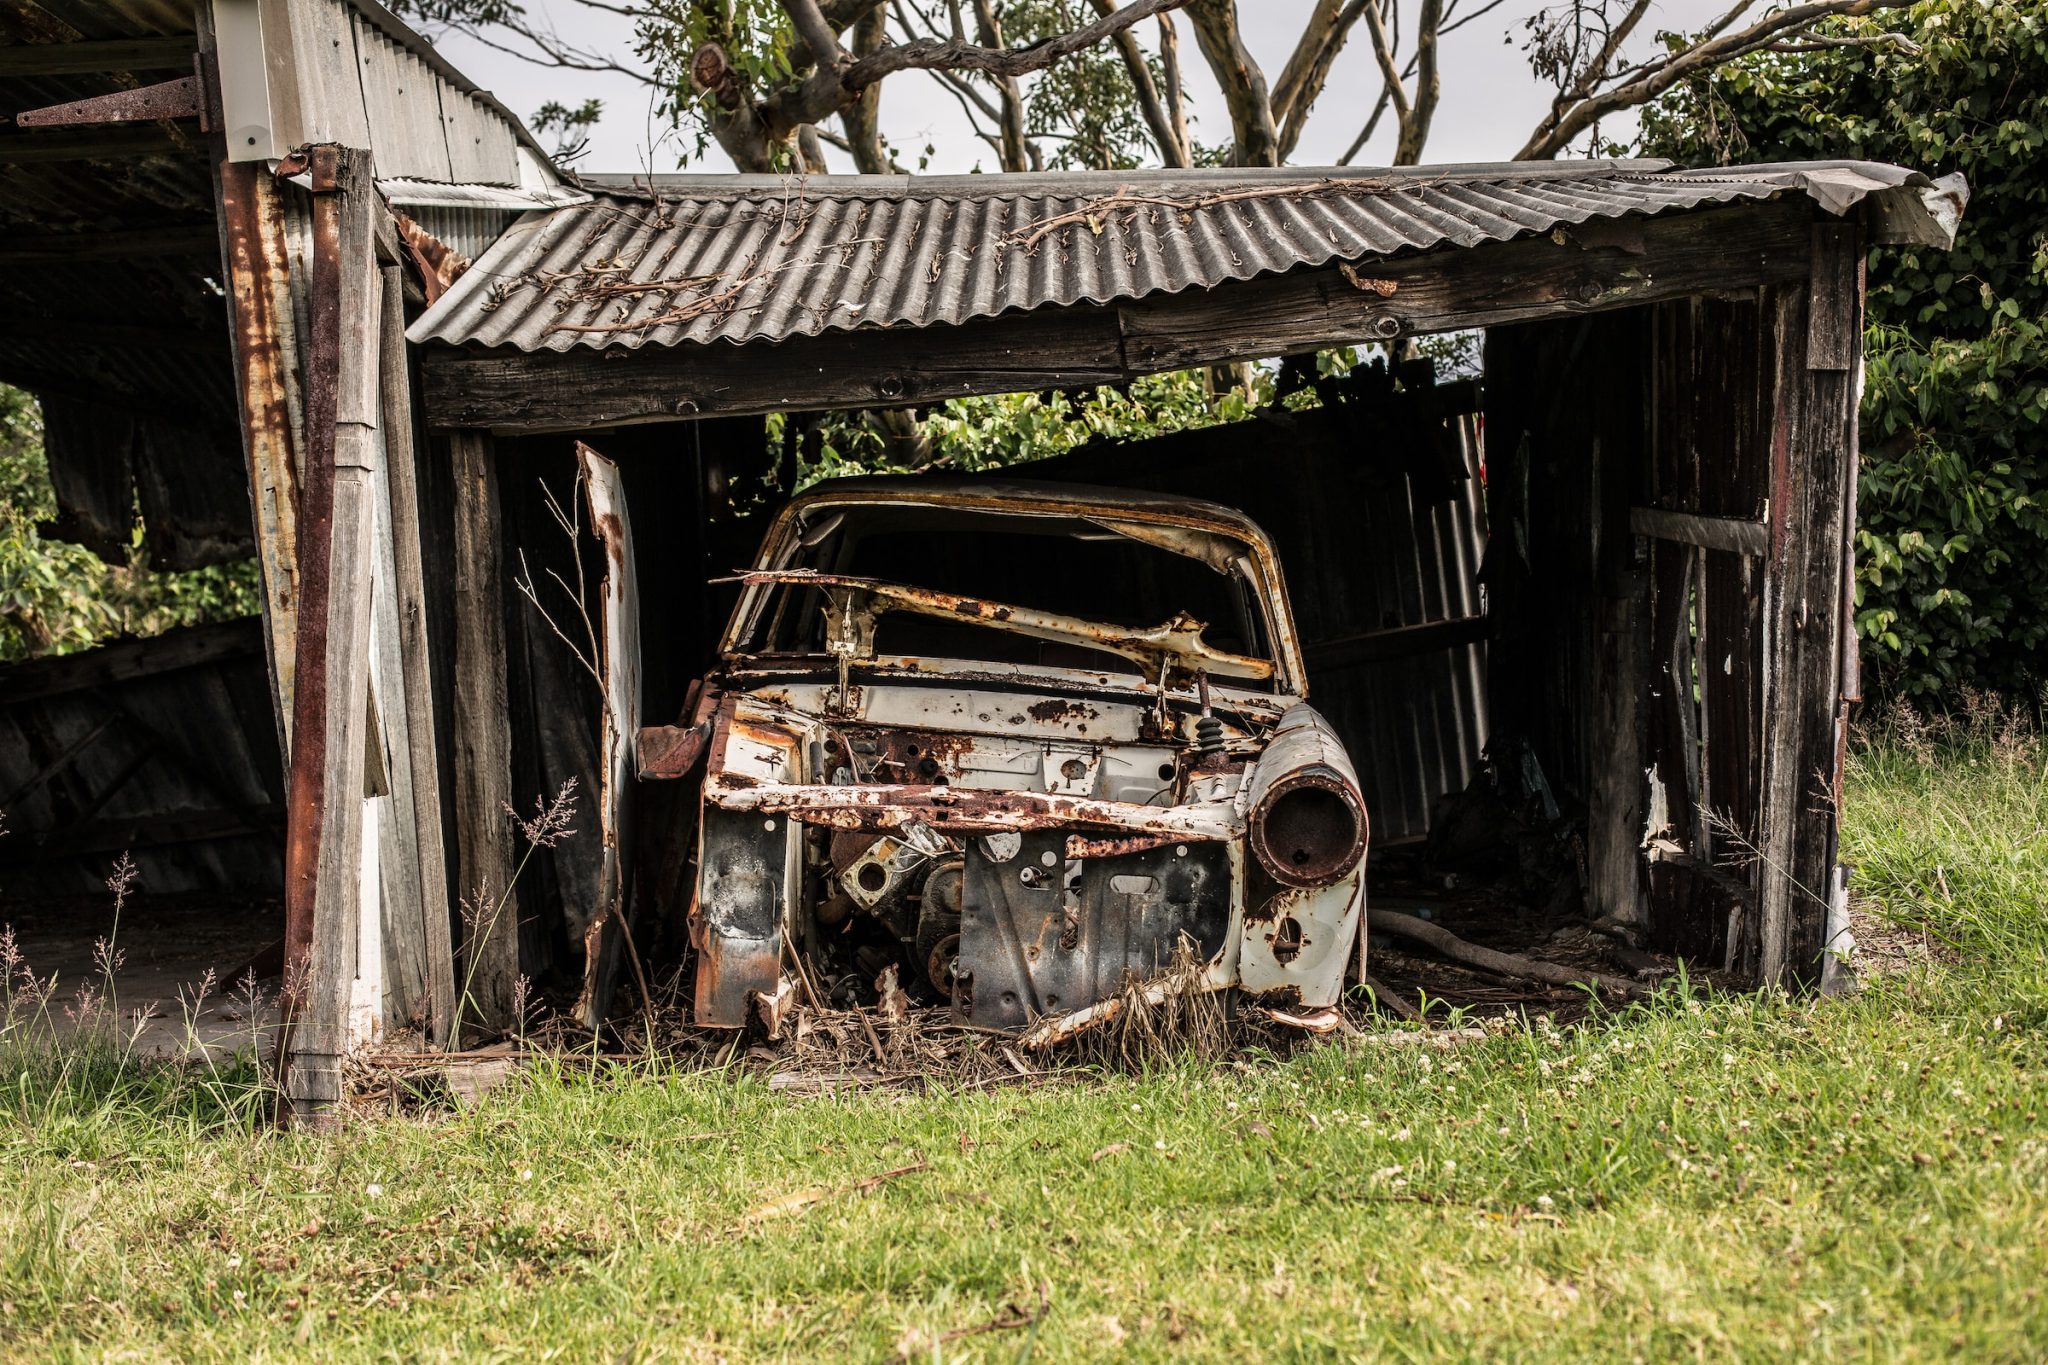 How To Maximize Value When Scrapping An Old Car?